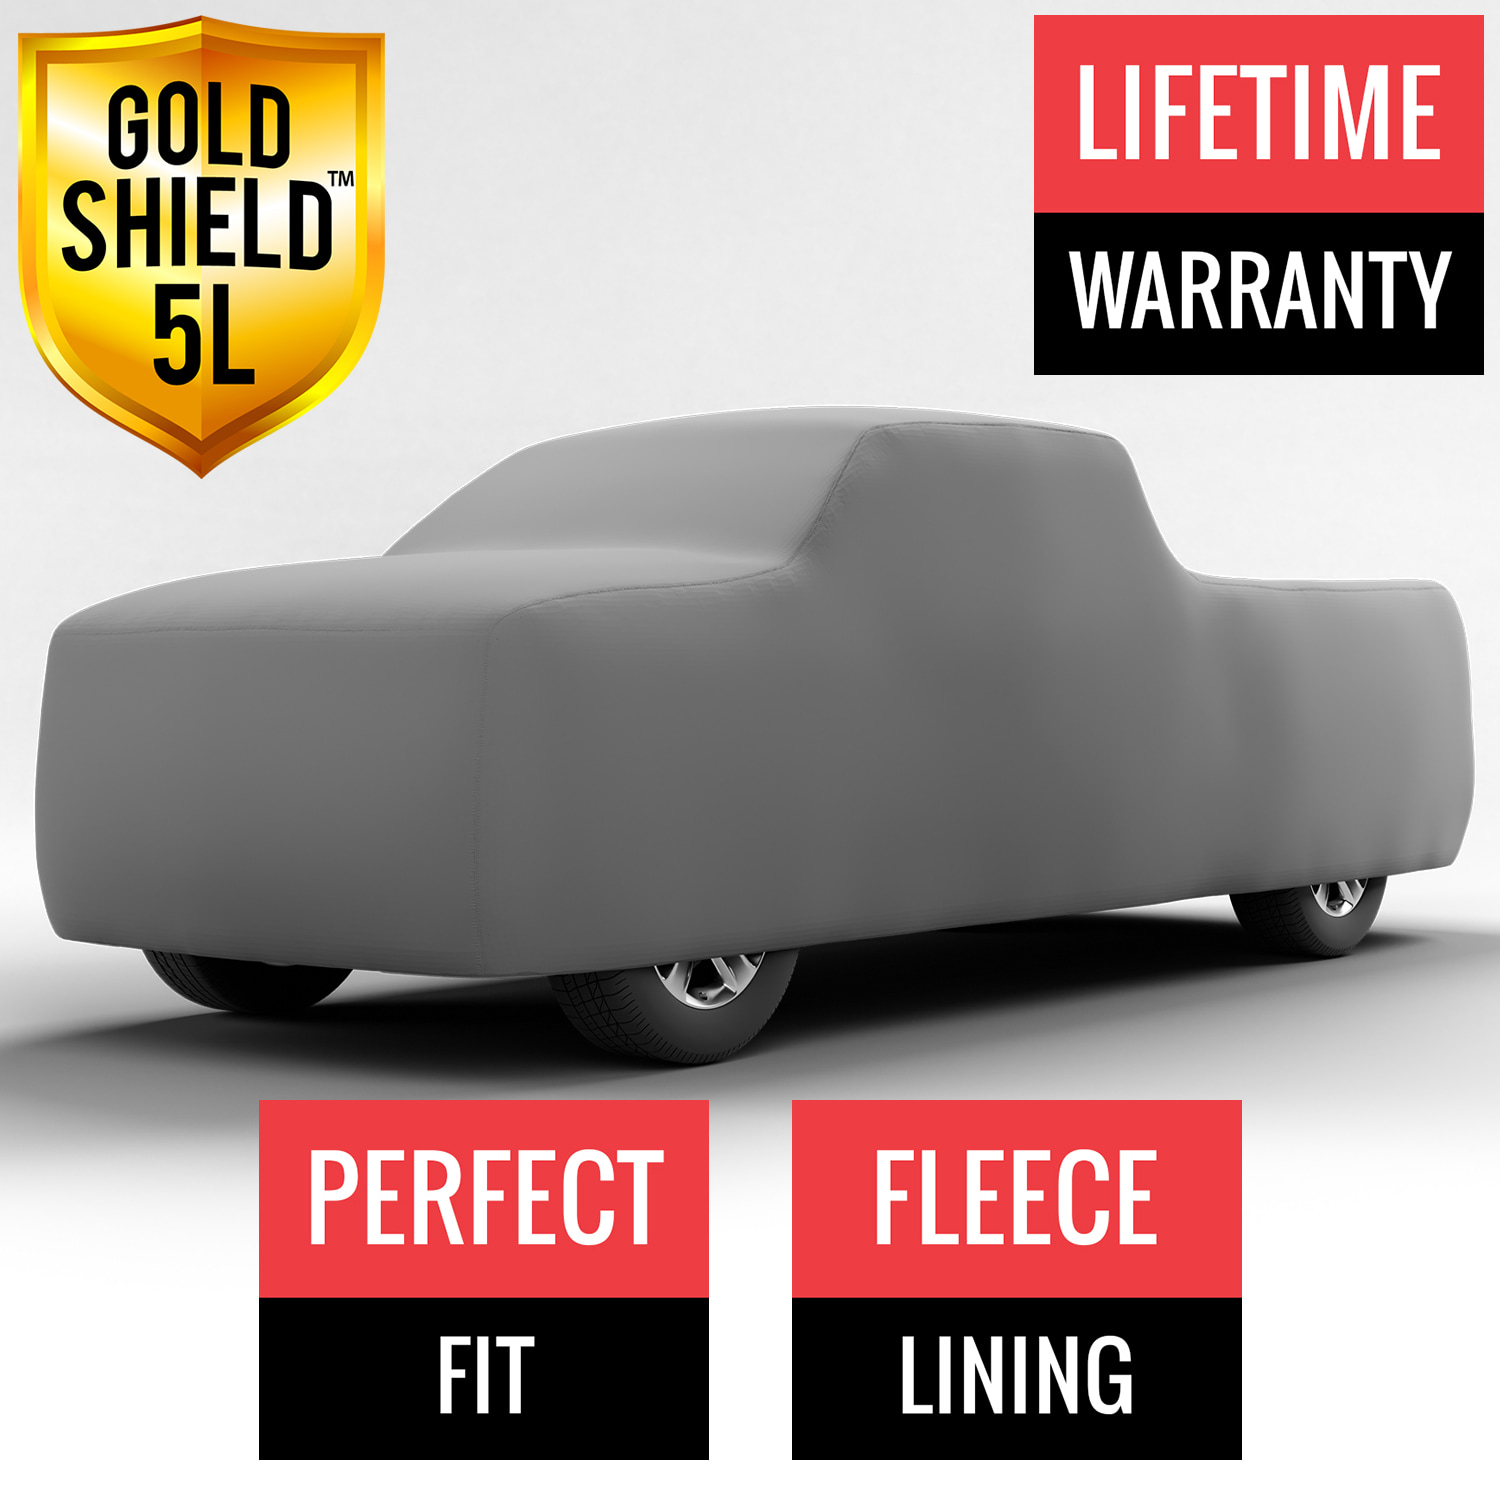 Gold Shield 5L - Car Cover for GMC C1500 1992 Extended Cab Pickup 8.0 Feet Bed